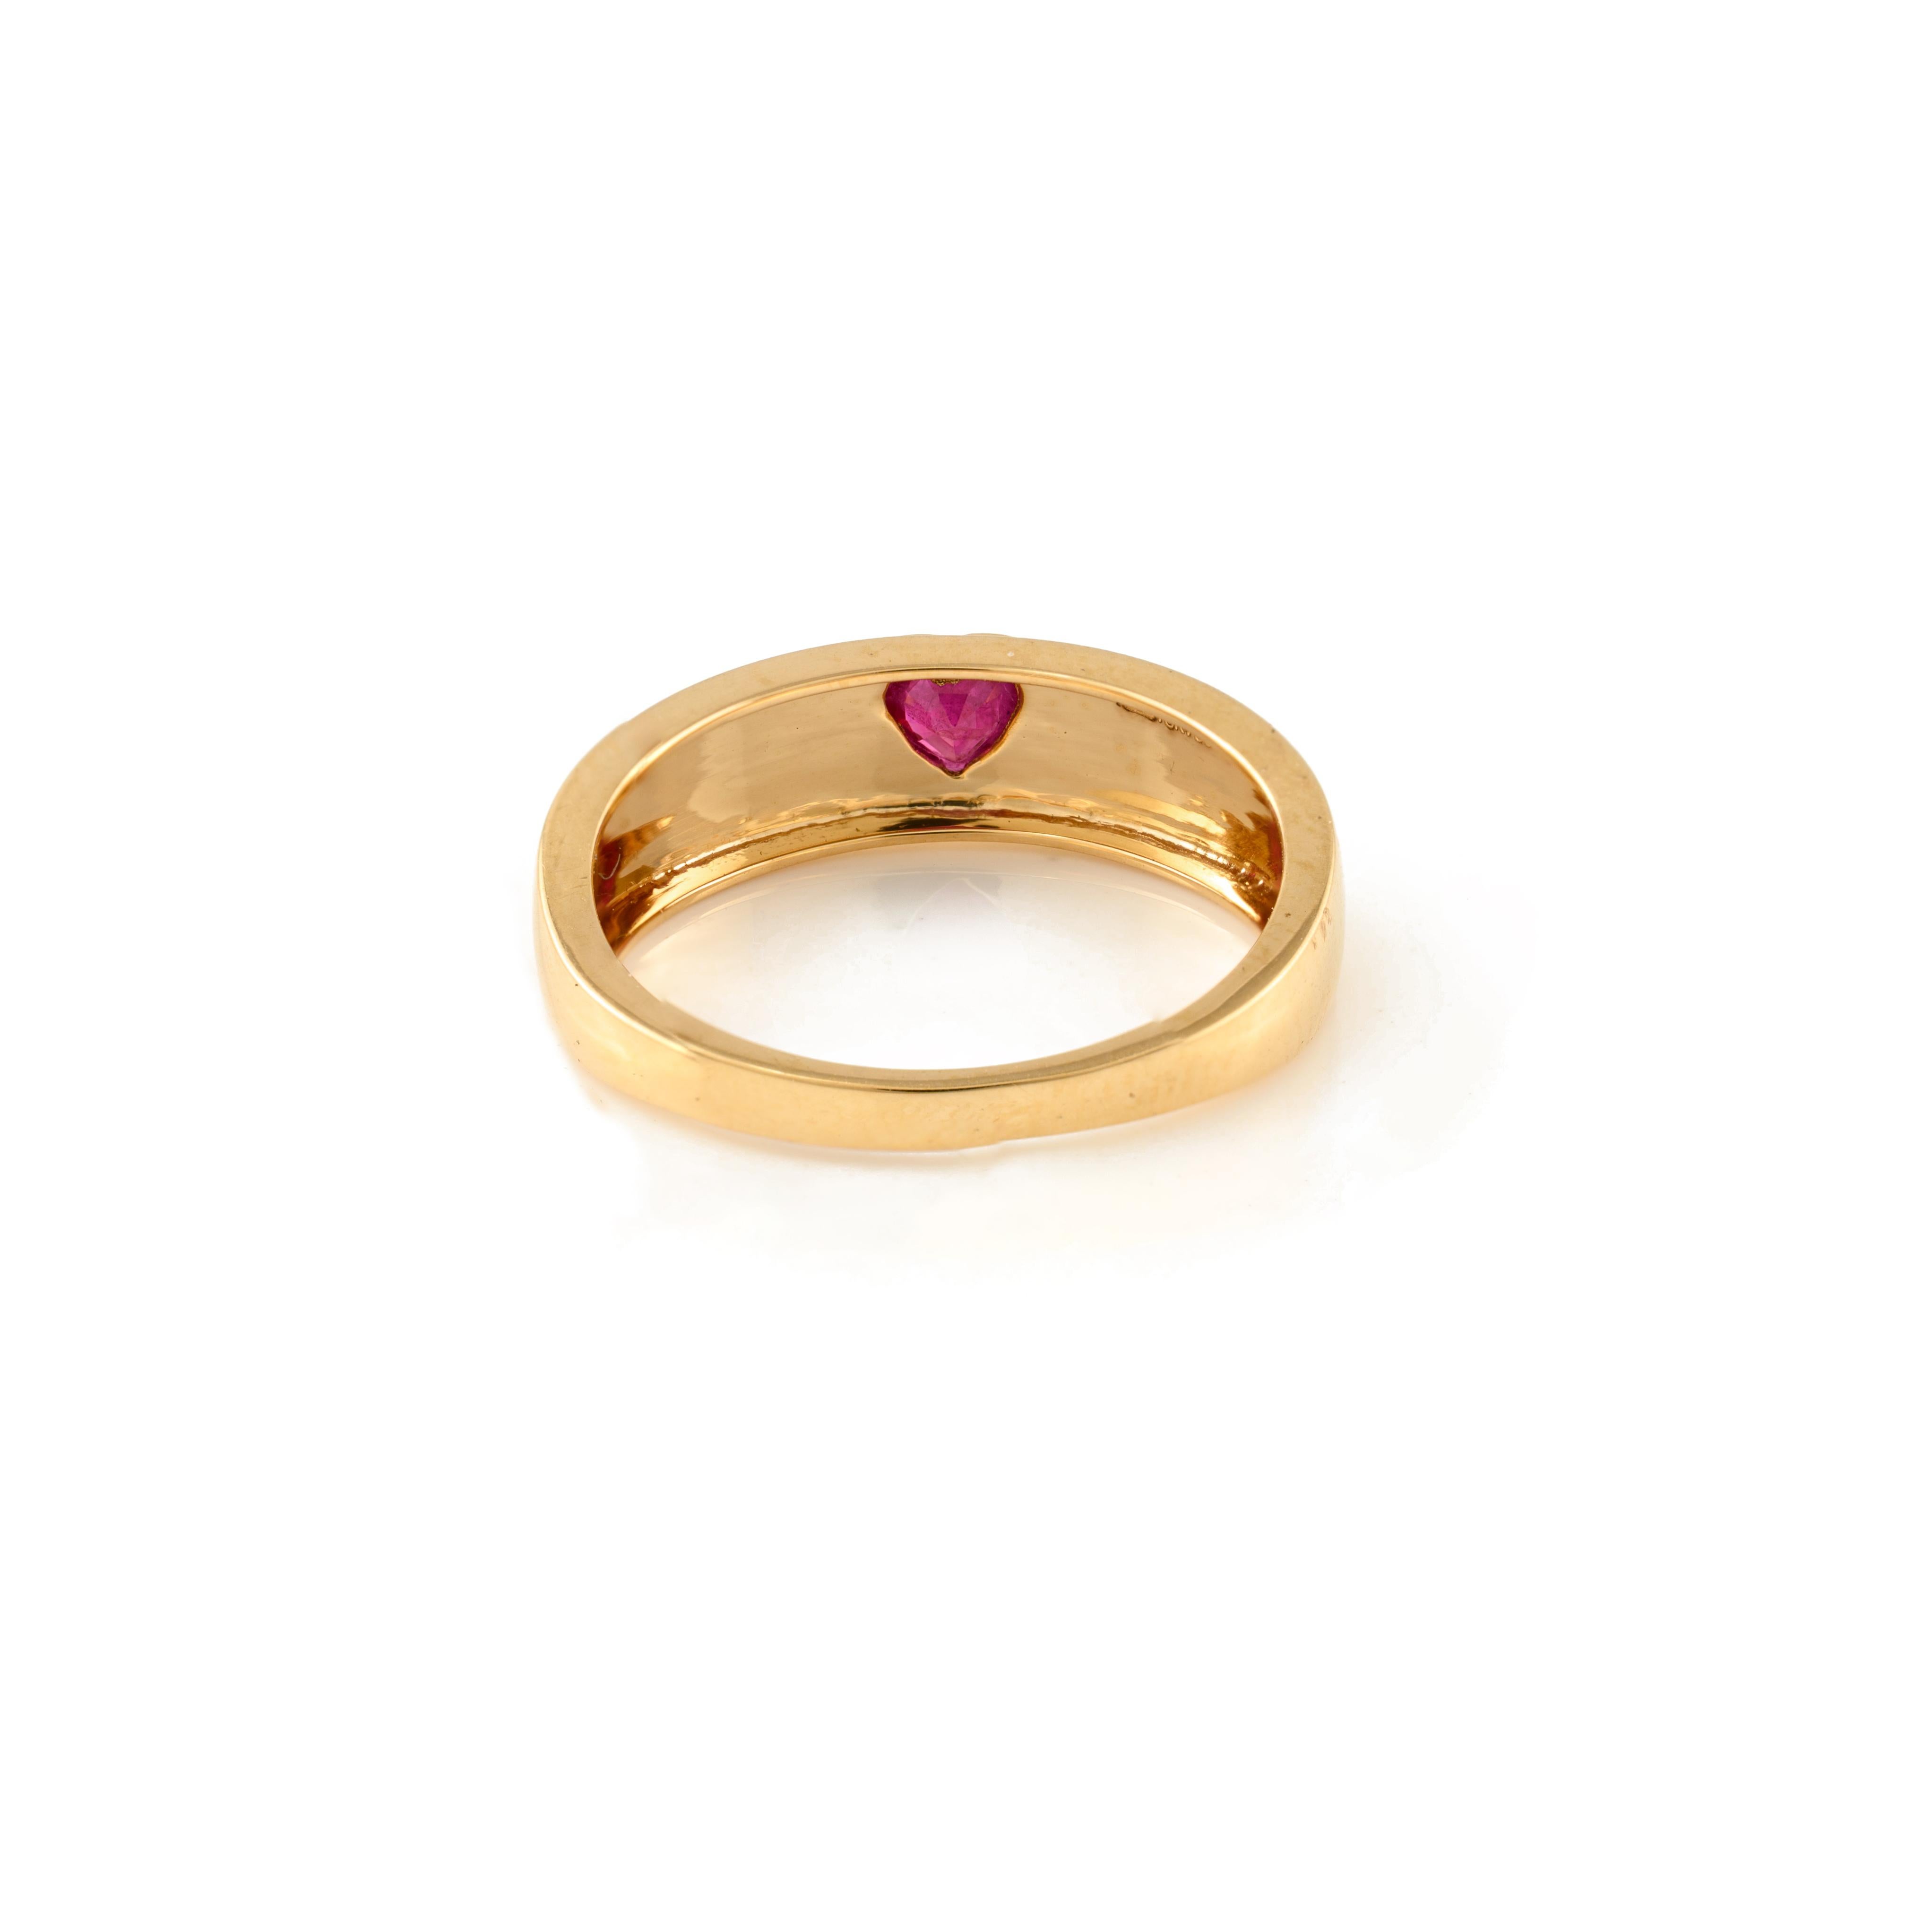 For Sale:  Dainty Heart Cut Ruby Mens Ring in 18k Solid Yellow Gold, Signet Ring for Her 9